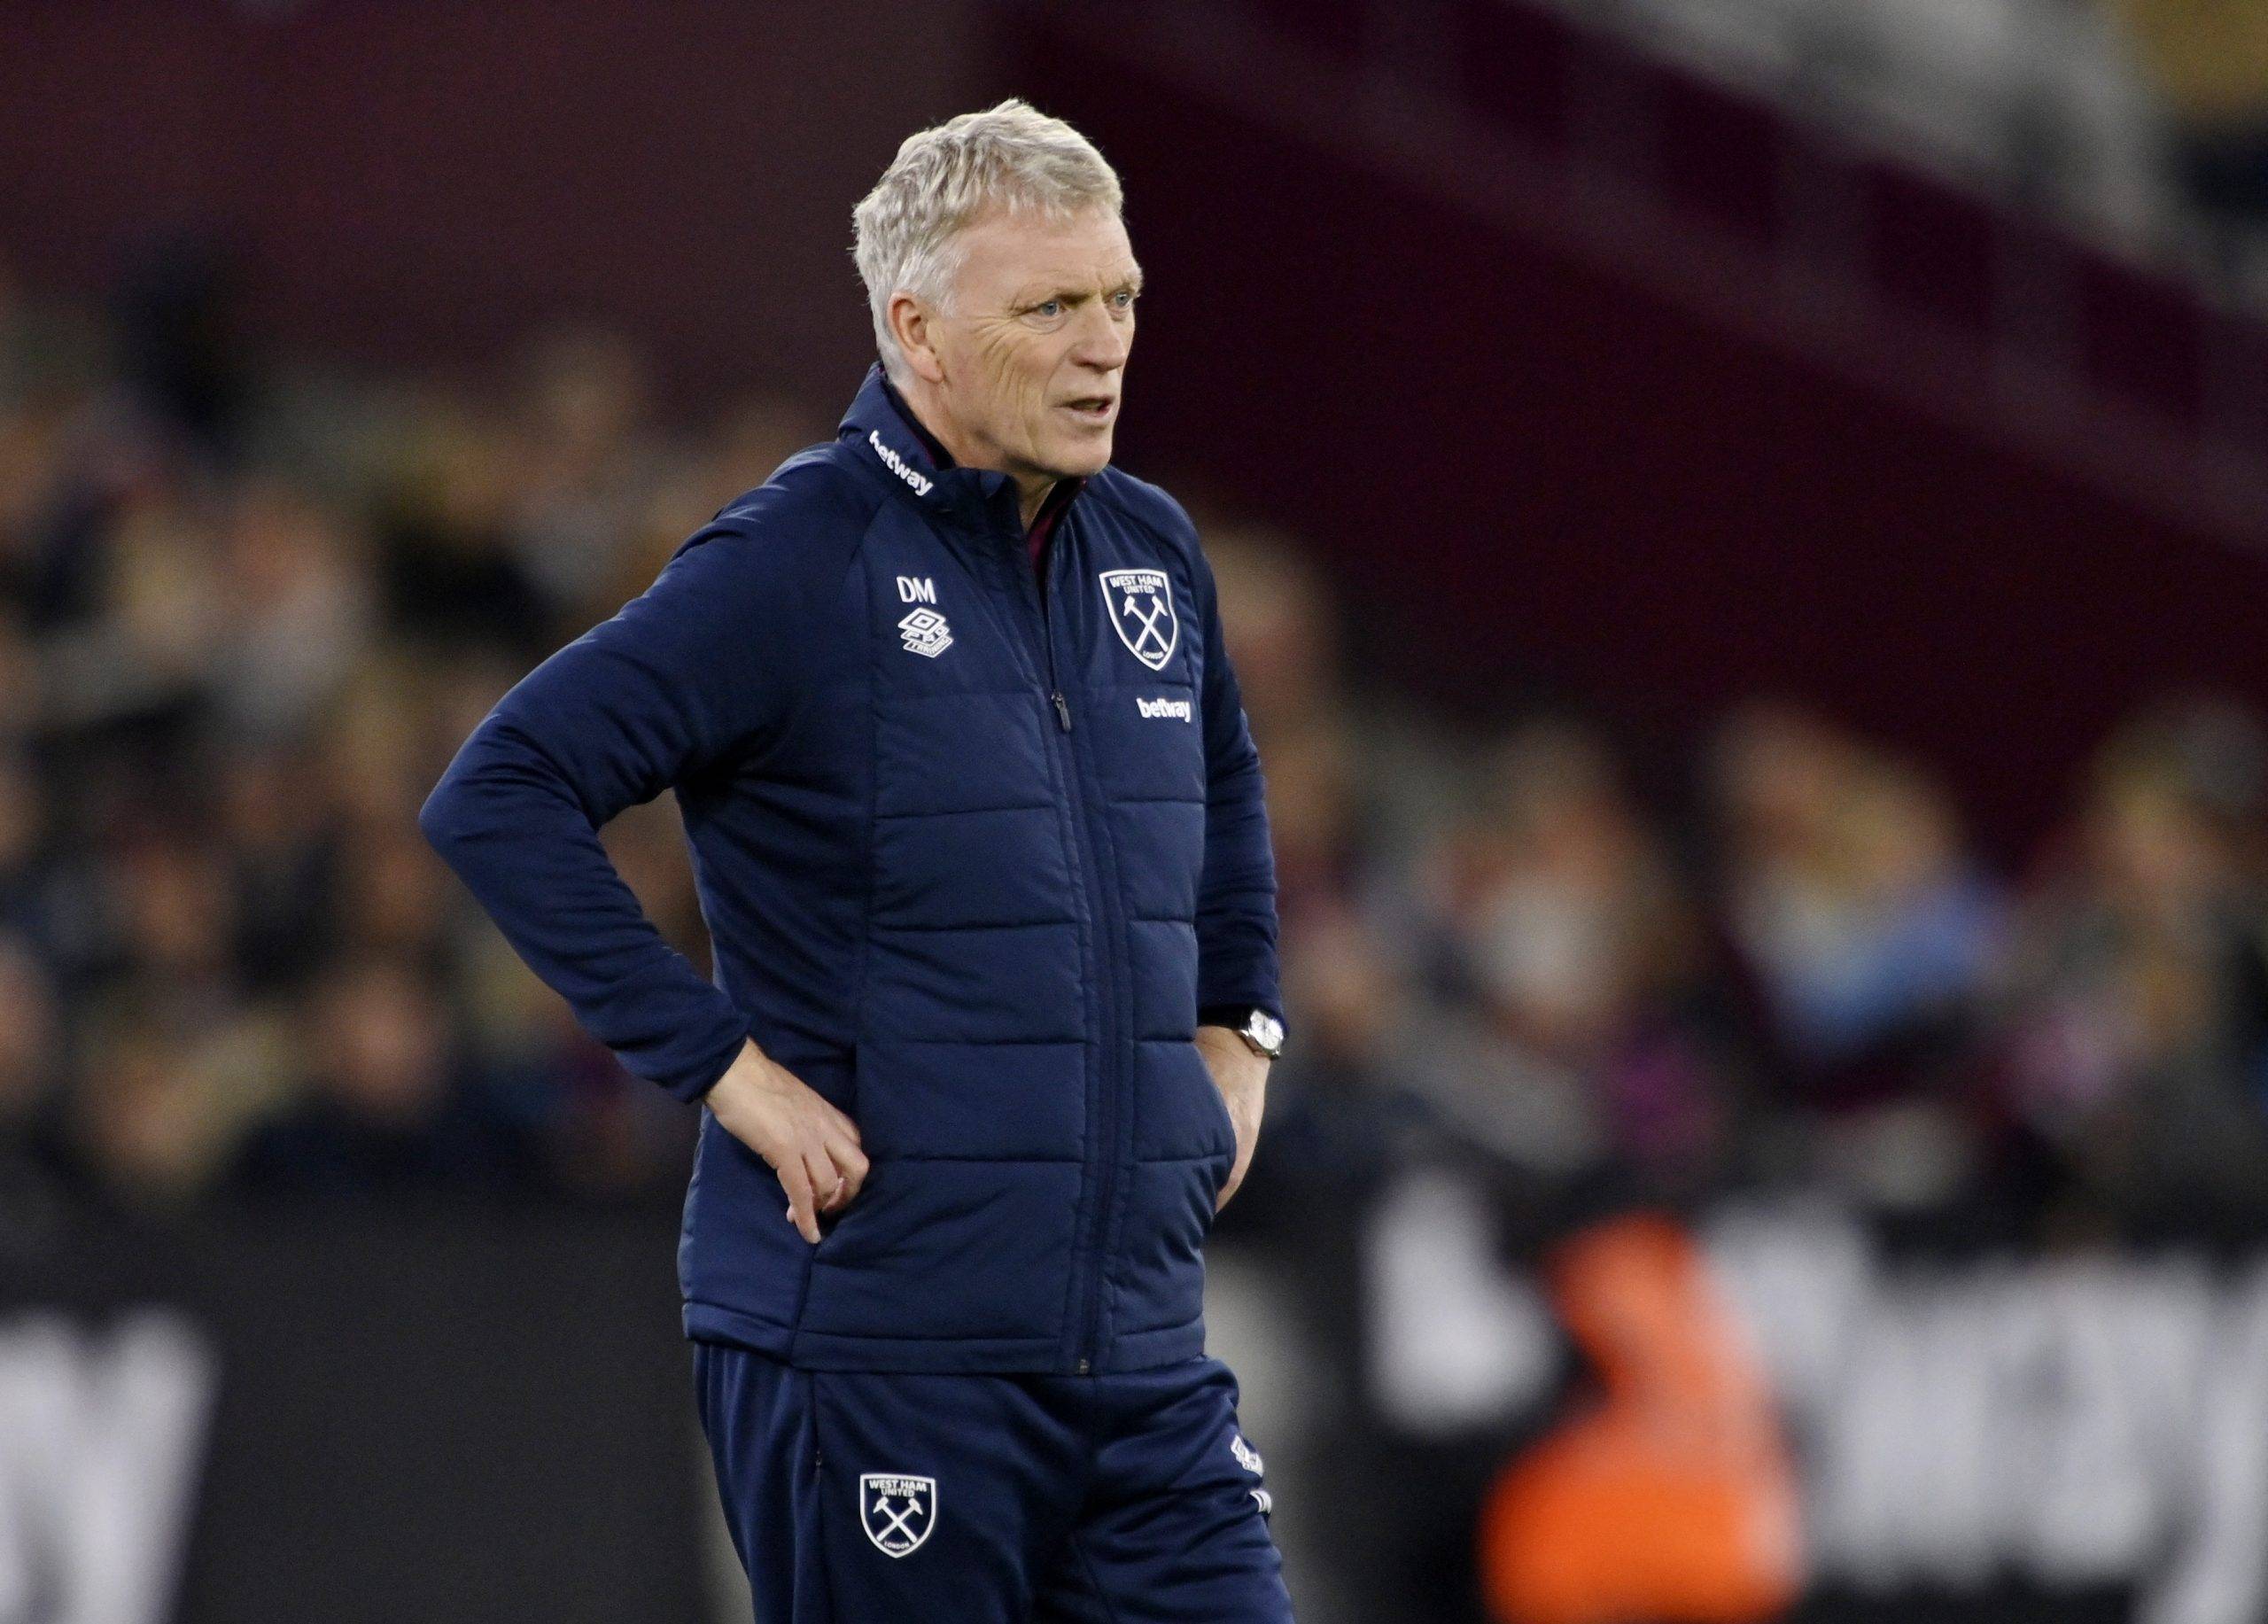 West Ham: David Moyes still has 'excellent relationship' with board - Follow up